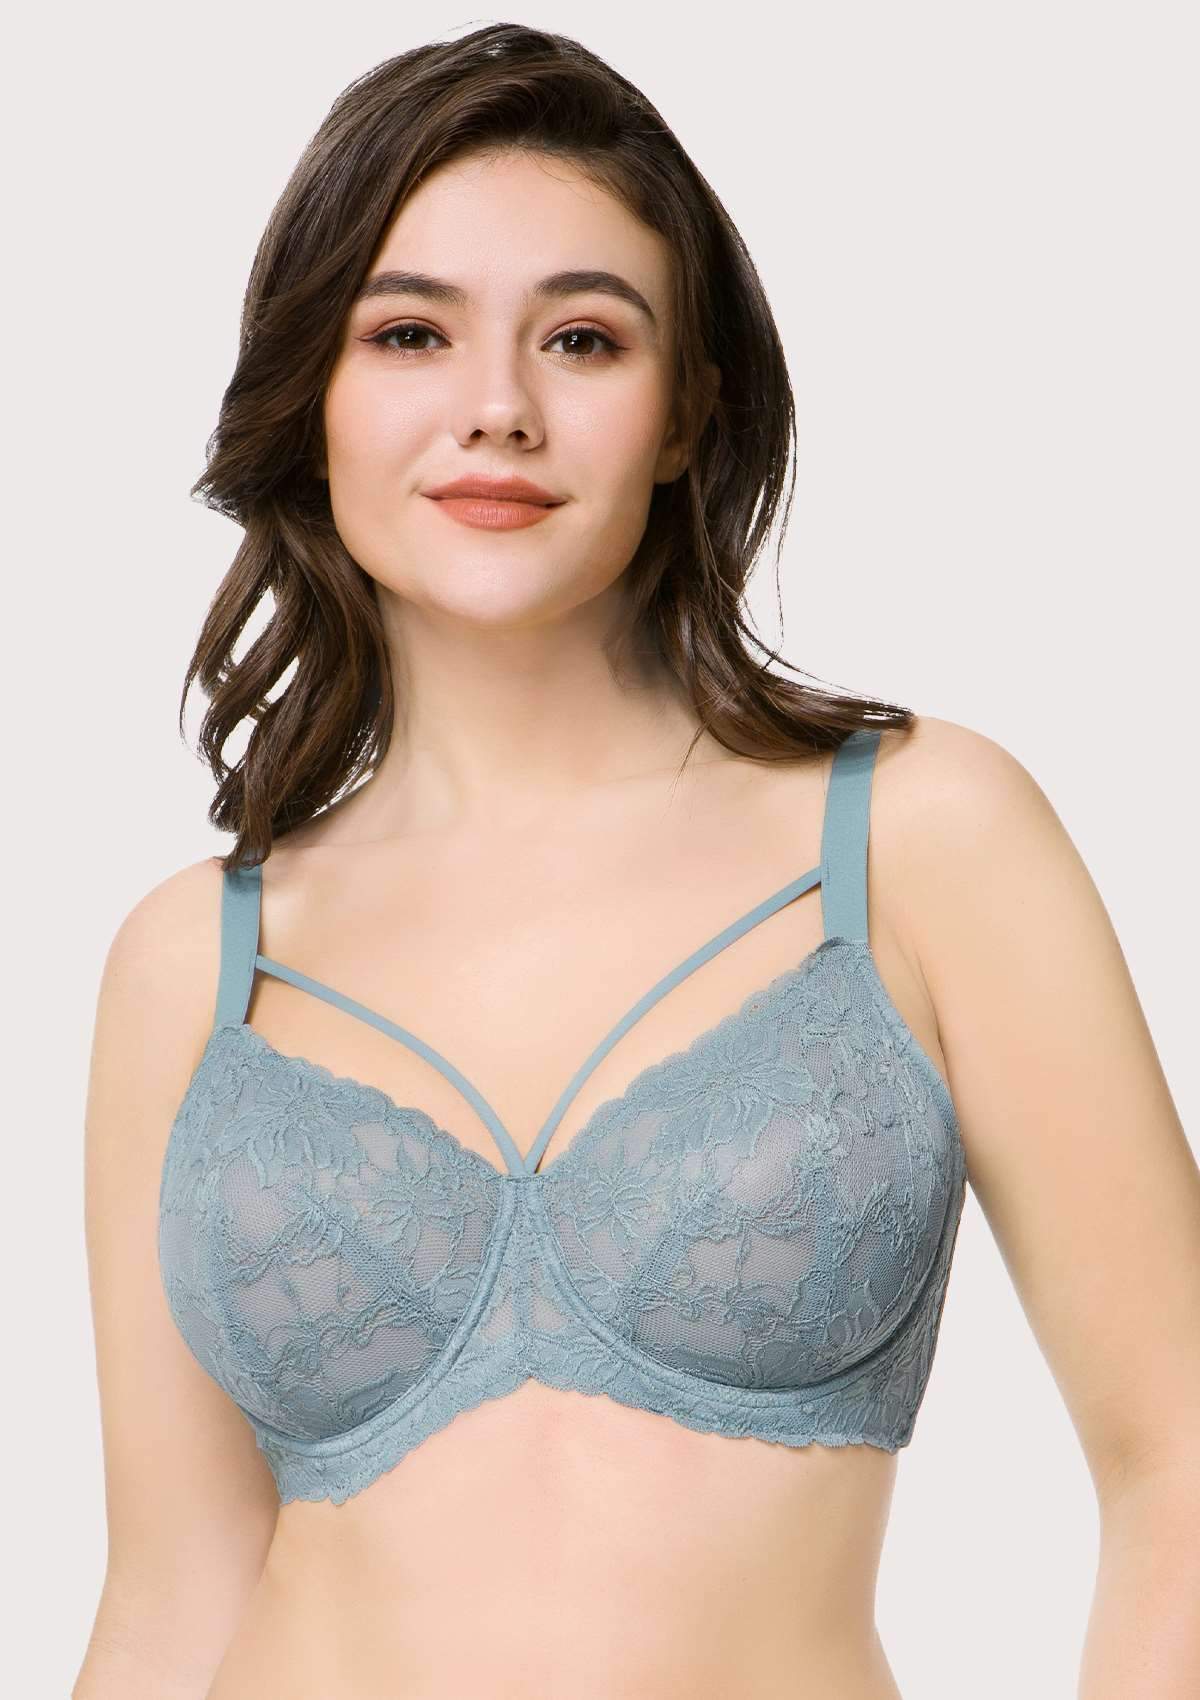 HSIA Pretty In Petals Unlined Lace Bra: Comfortable And Supportive Bra - Crystal Blue / 38 / D